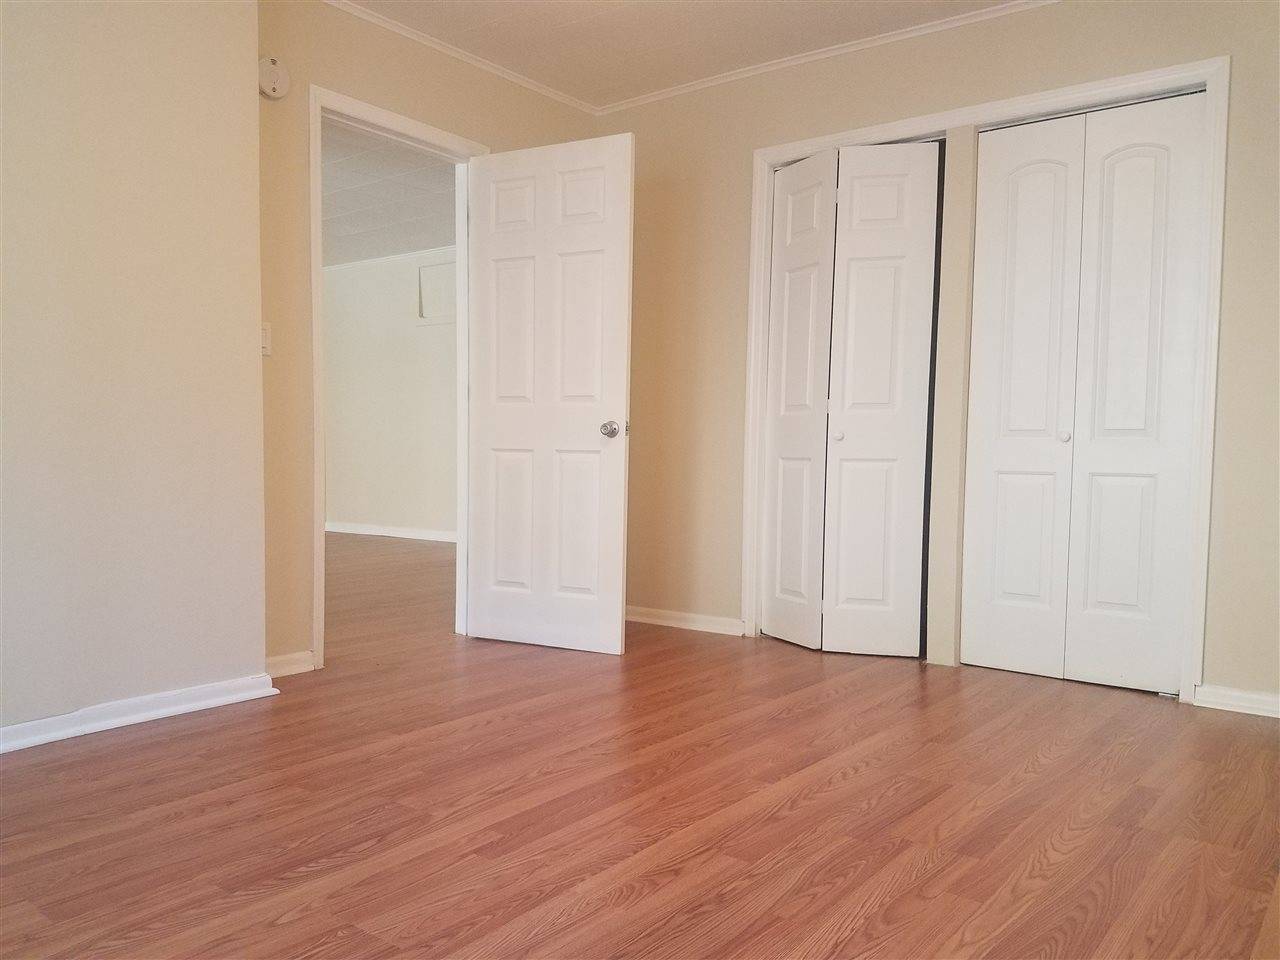 Peaceful 1 bed/1 bath apartment in Ridgefield Park with easy access to Rt